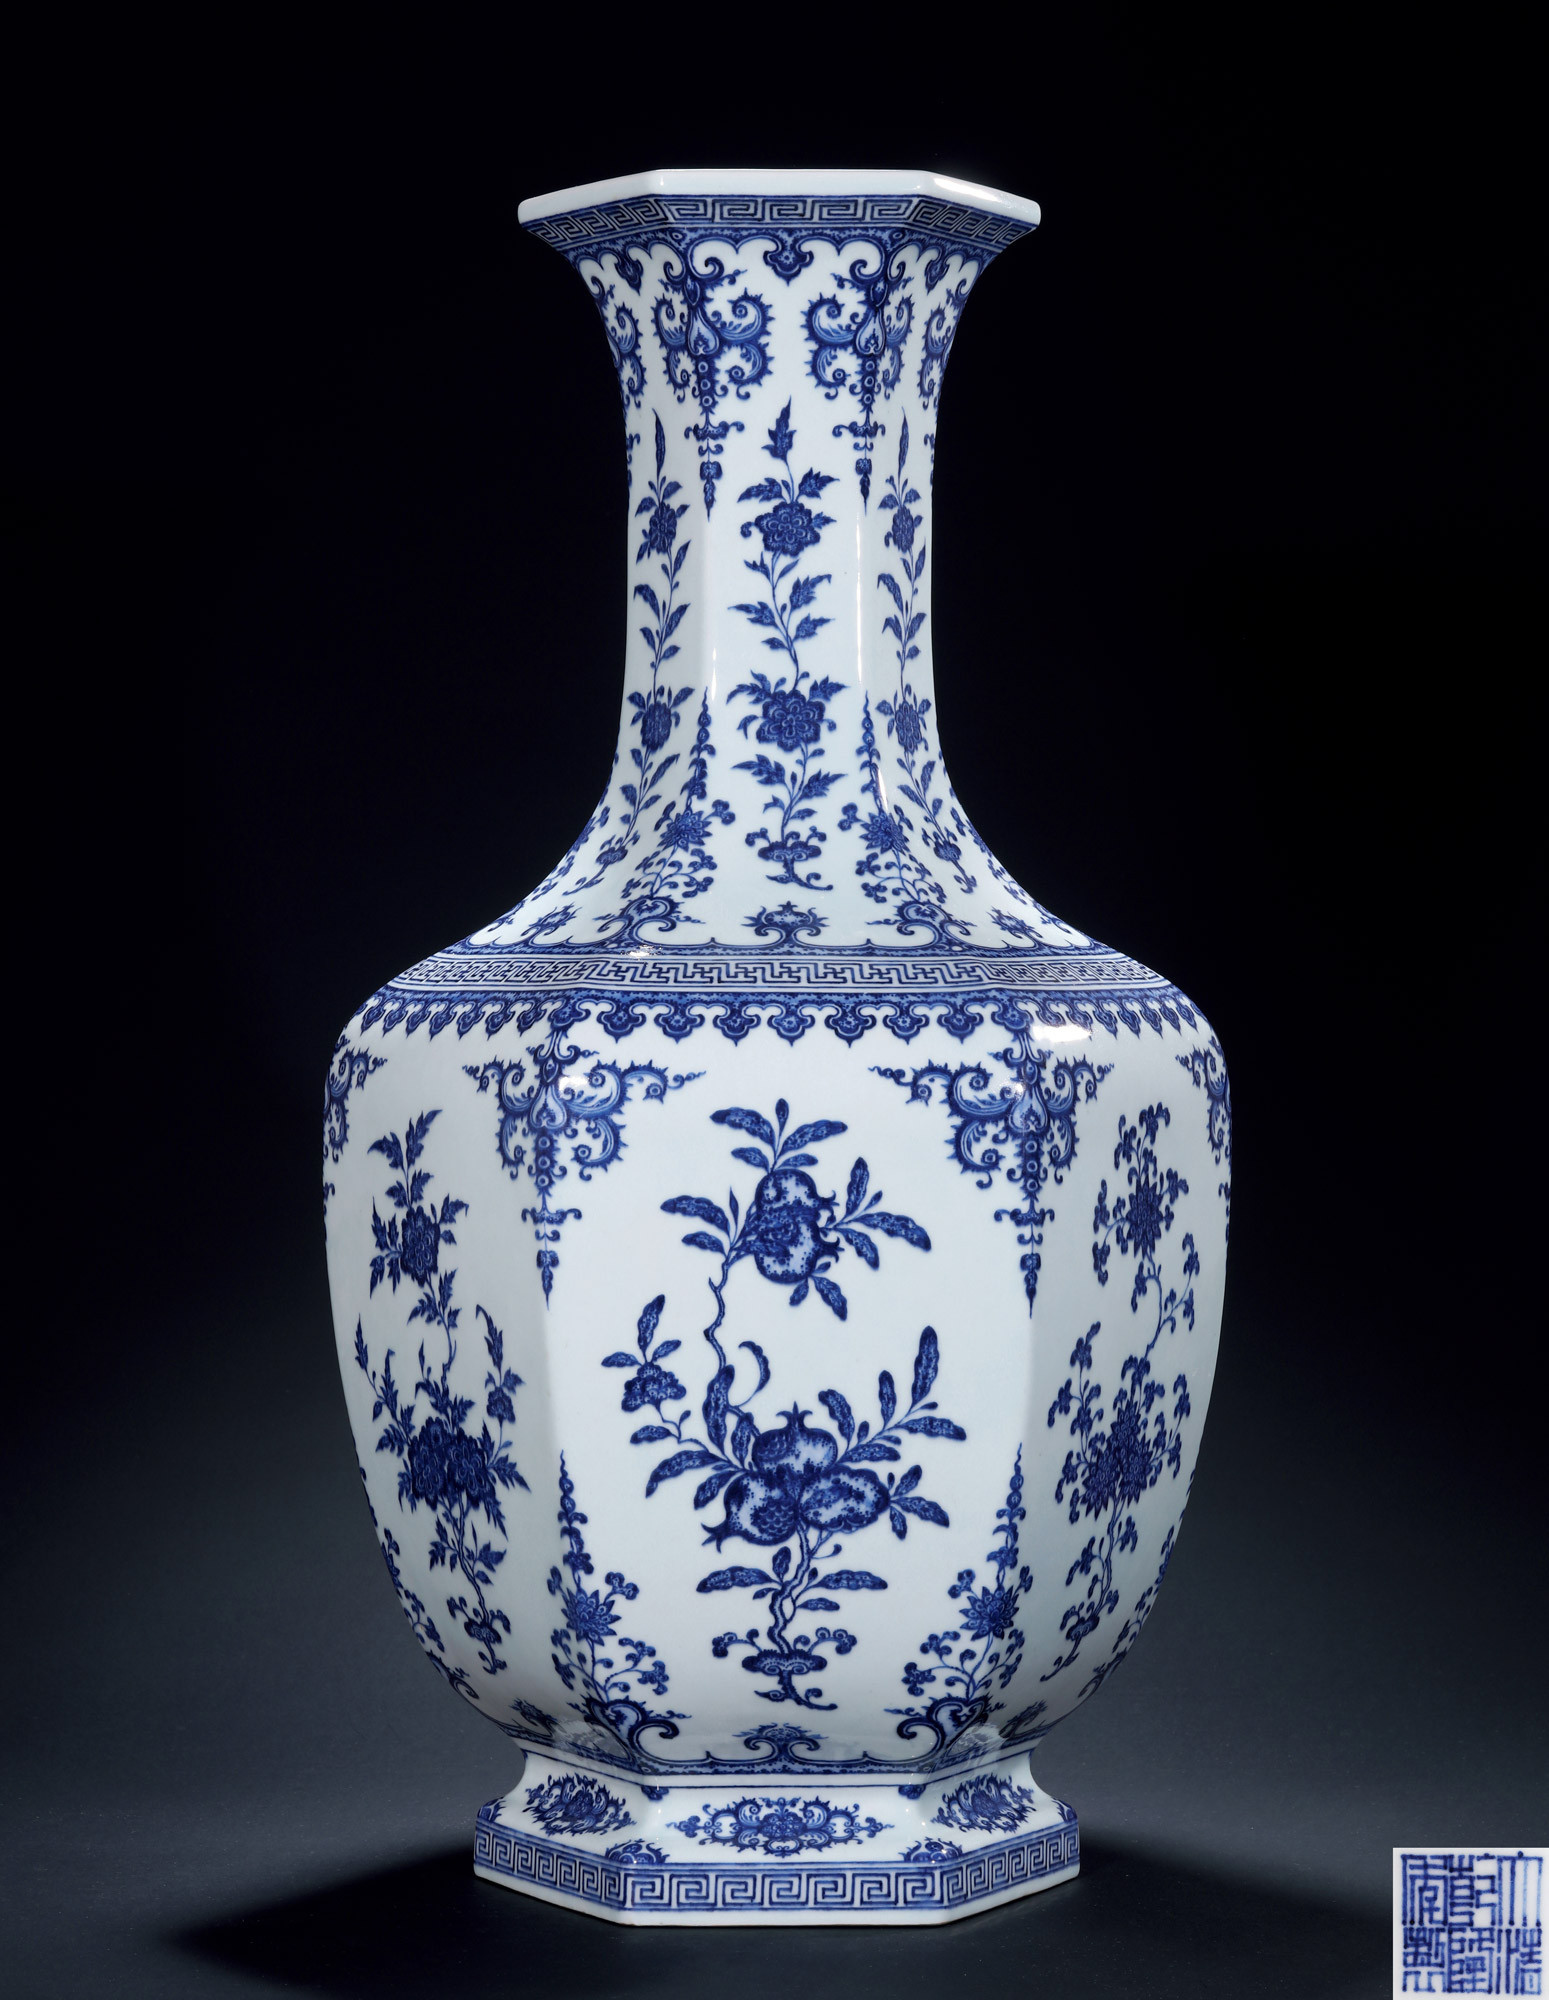 A BLUE-AND-WHITE FLOWER AND FRUITS AMONG LEAVES HEXAGONAL VASE